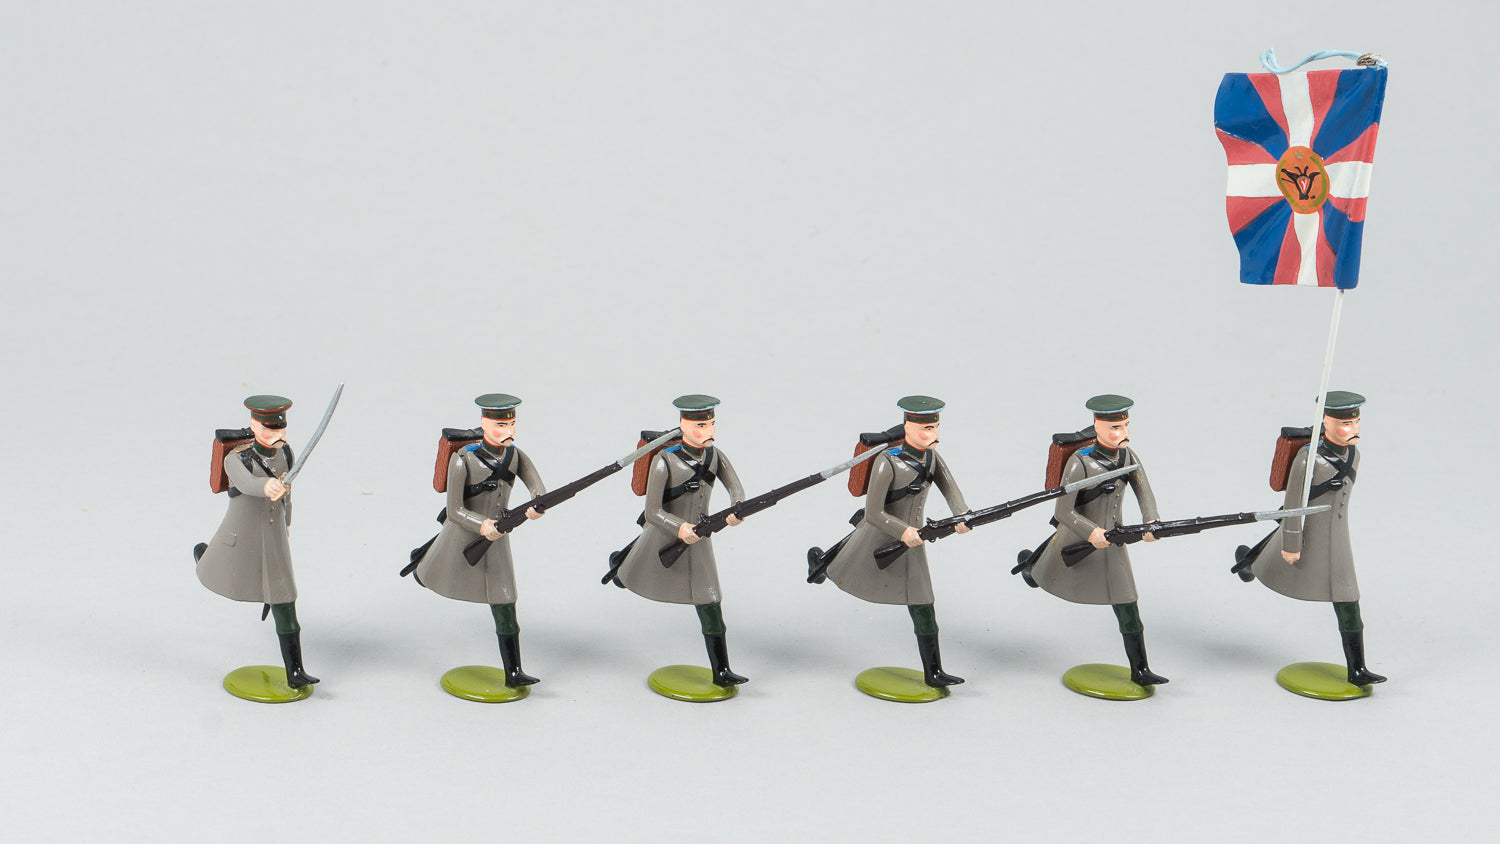 85 Russian Light Infantry charging